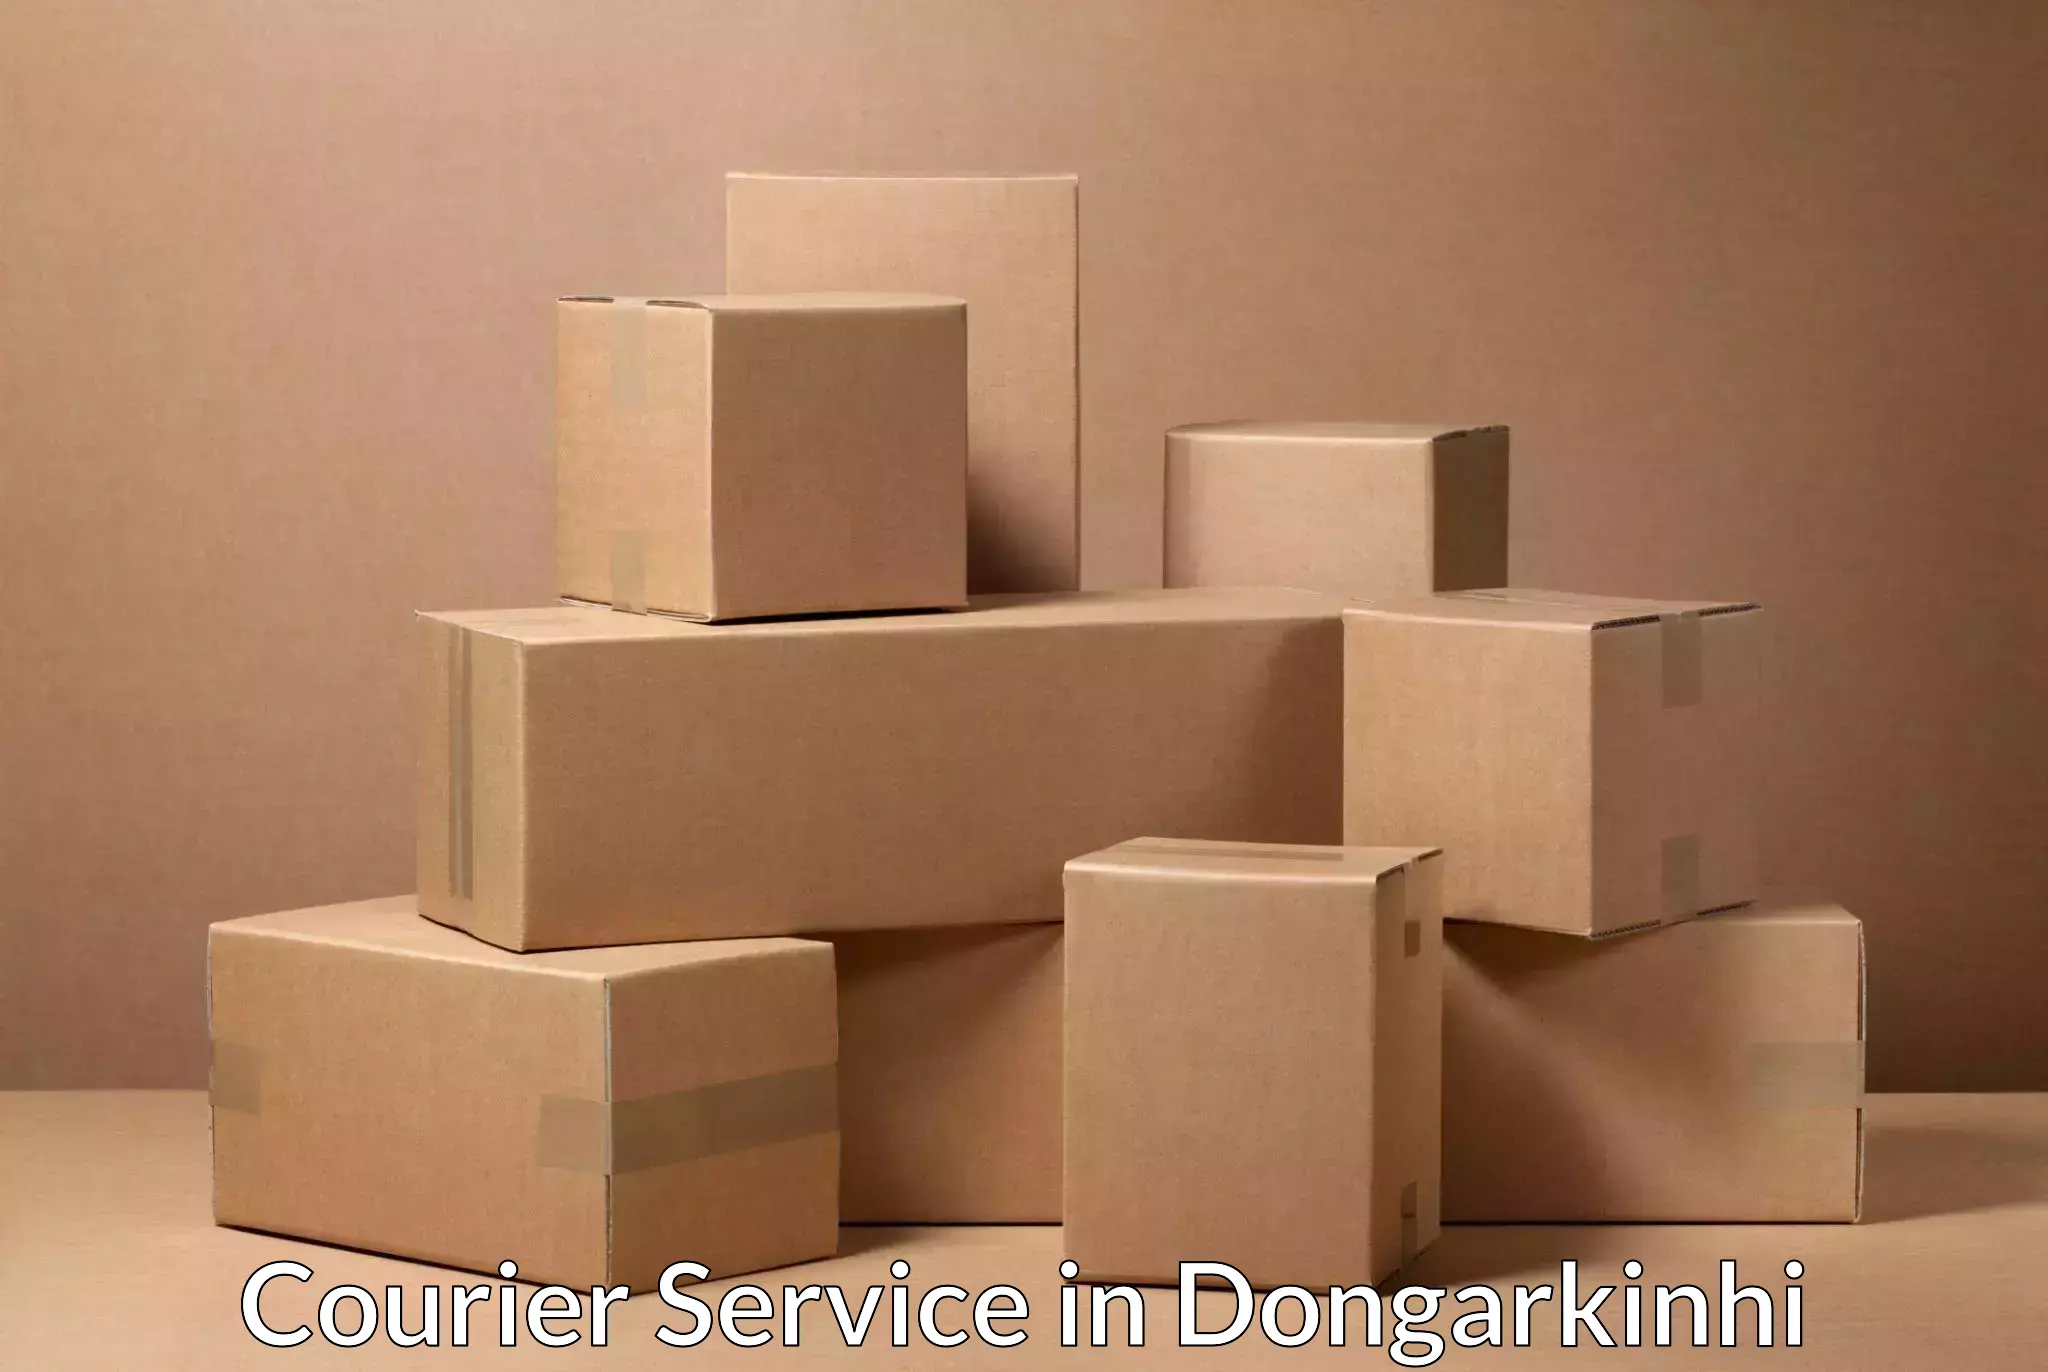 Nationwide parcel services in Dongarkinhi